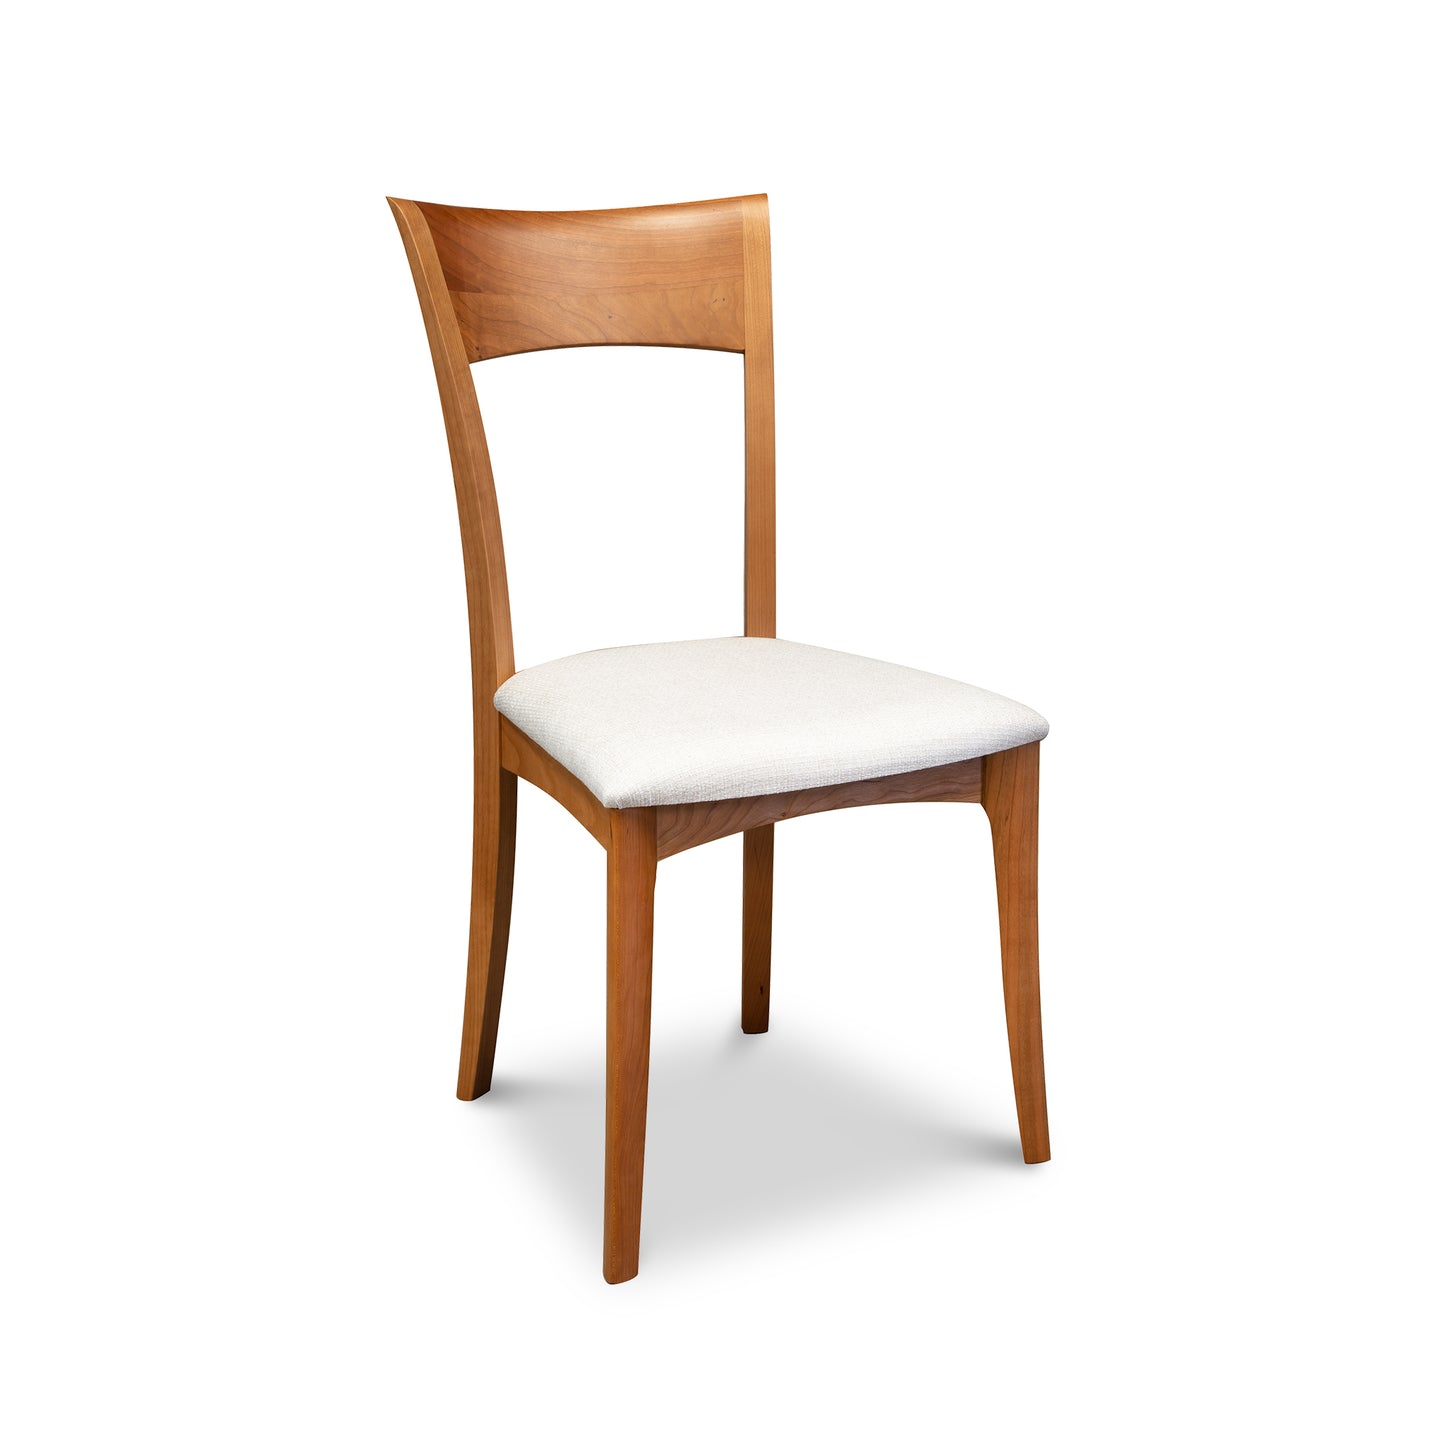 An Ingrid Shaker dining chair from Copeland Furniture with a white seat.